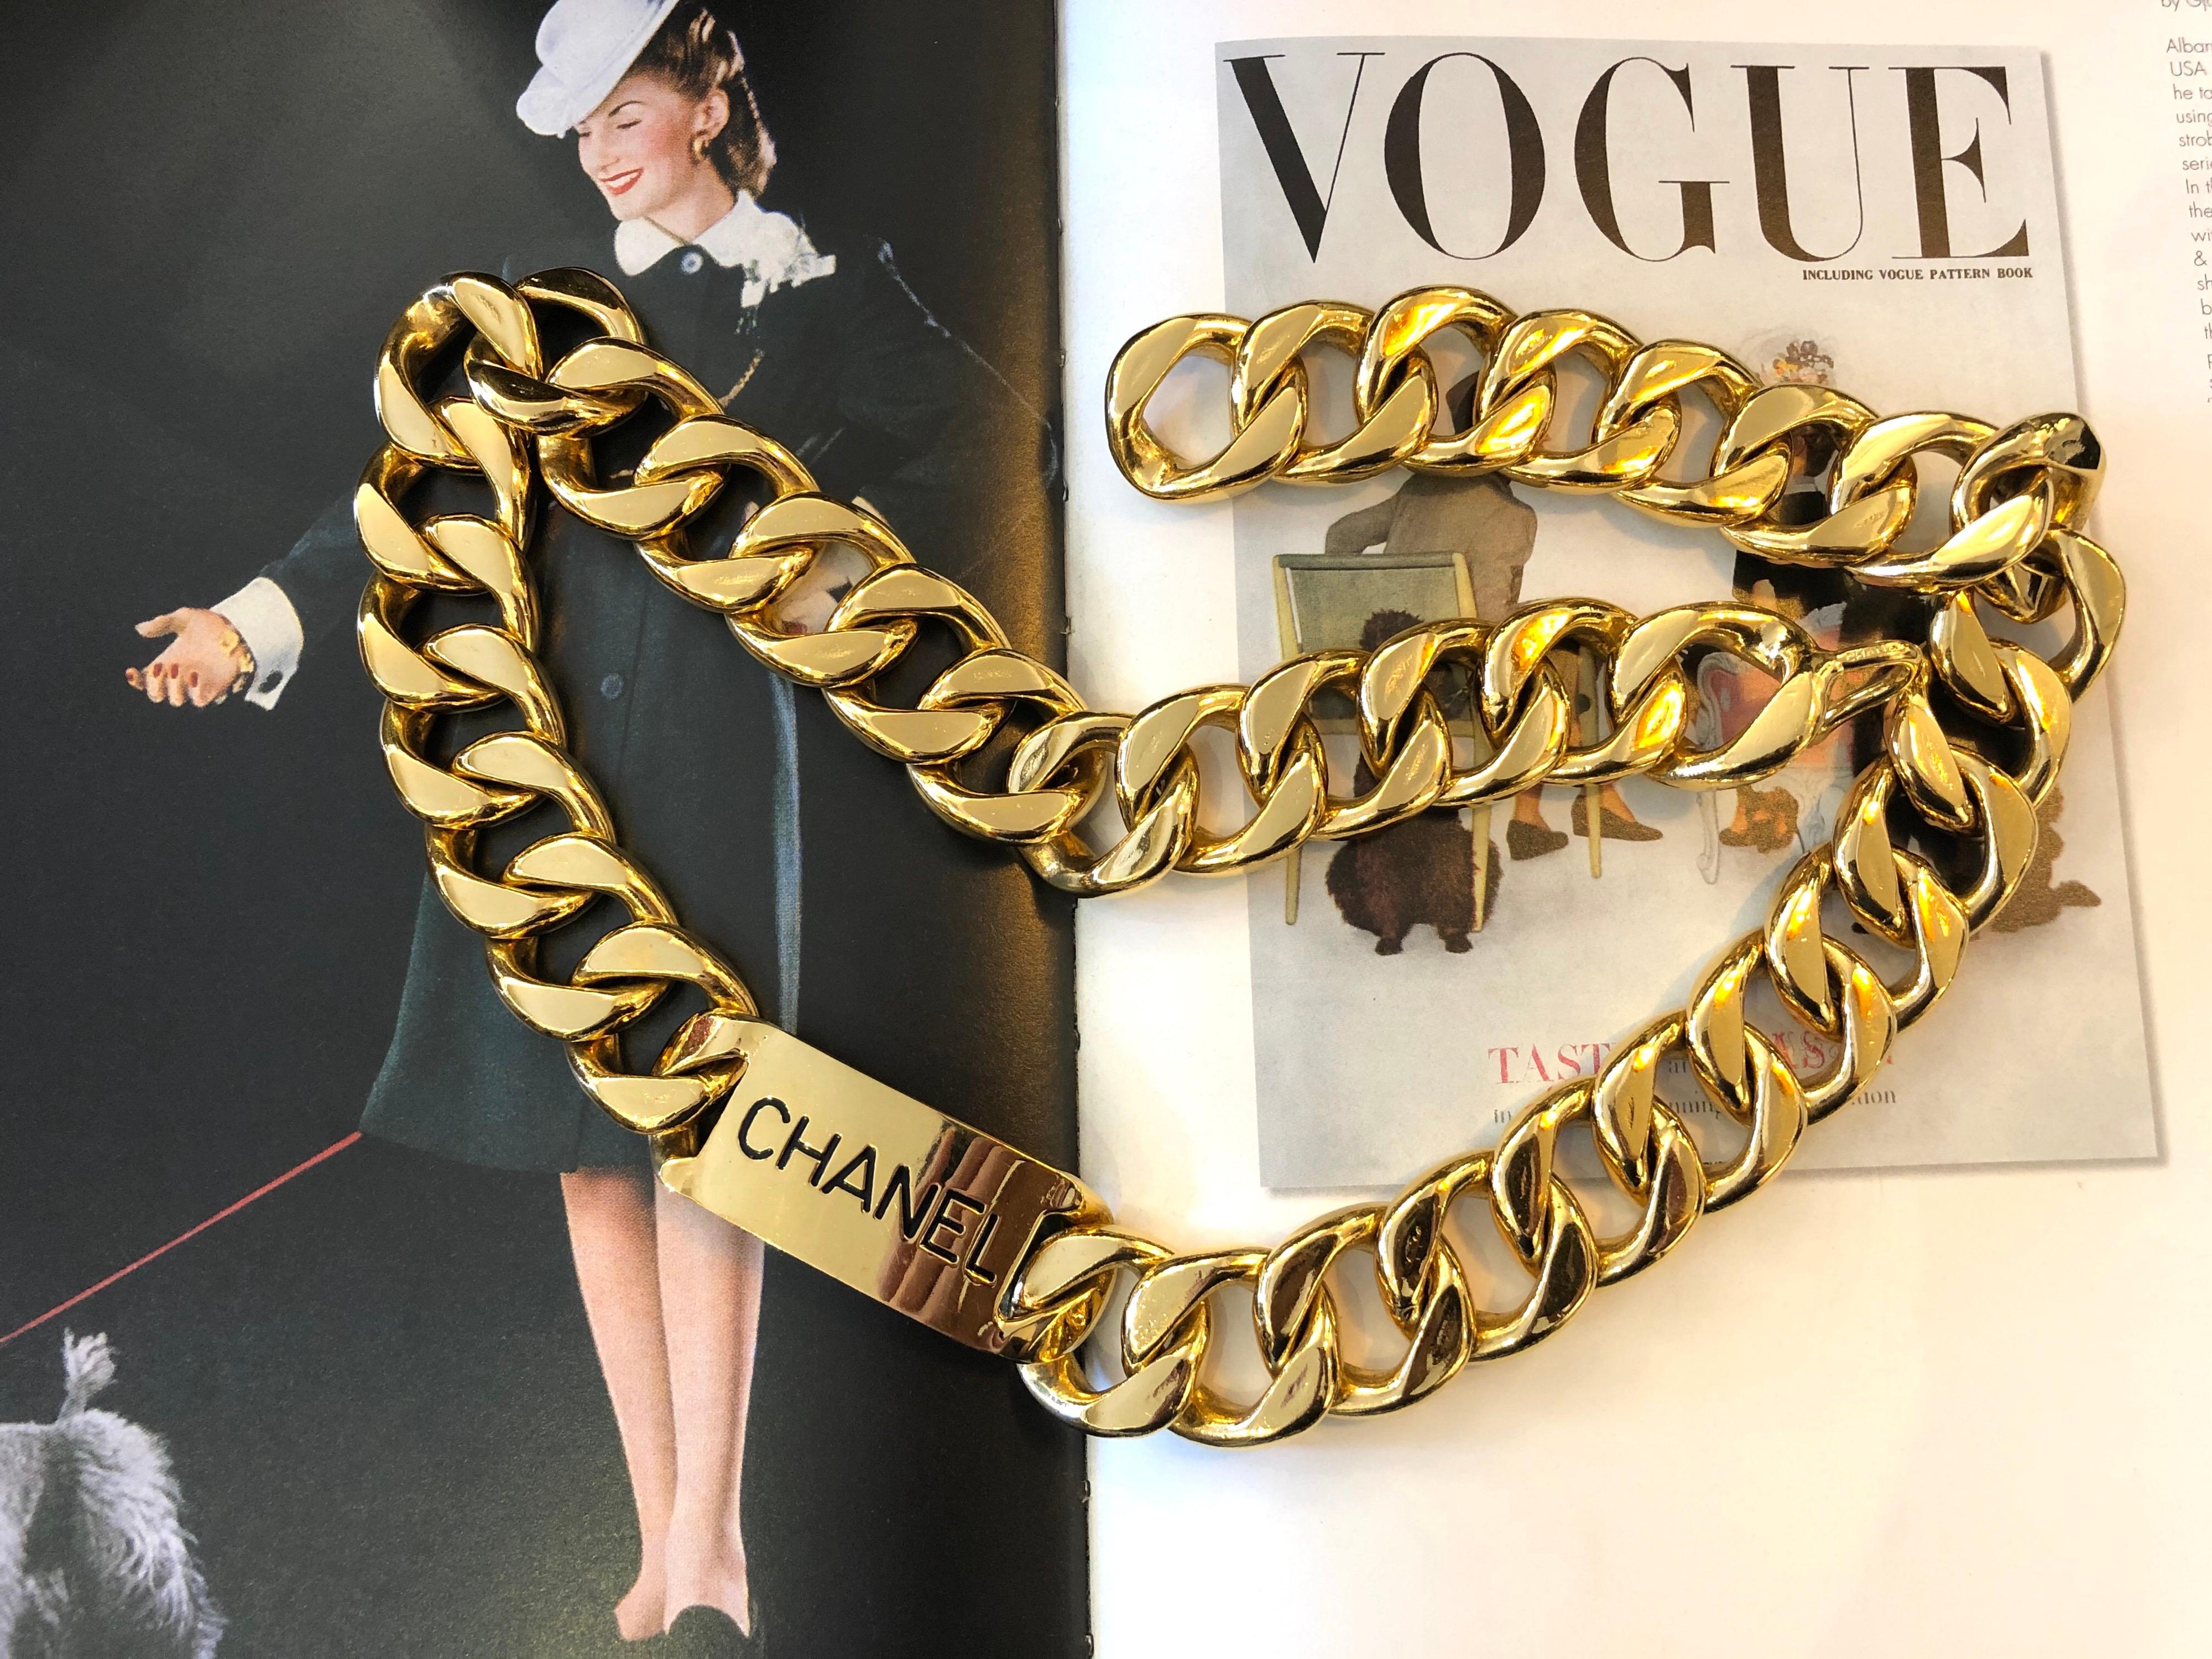 Vintage Chanel hunky gold toned chain belt featuring a CHANEL plaque. Stamped CHANEL. Length 70cm (27.5 inches) Chian width 3.4cm (1.35 inches) Weight 370 grams. Adjustable hook fastening closure. Comes with box.


Condition: Minor signs of wear and